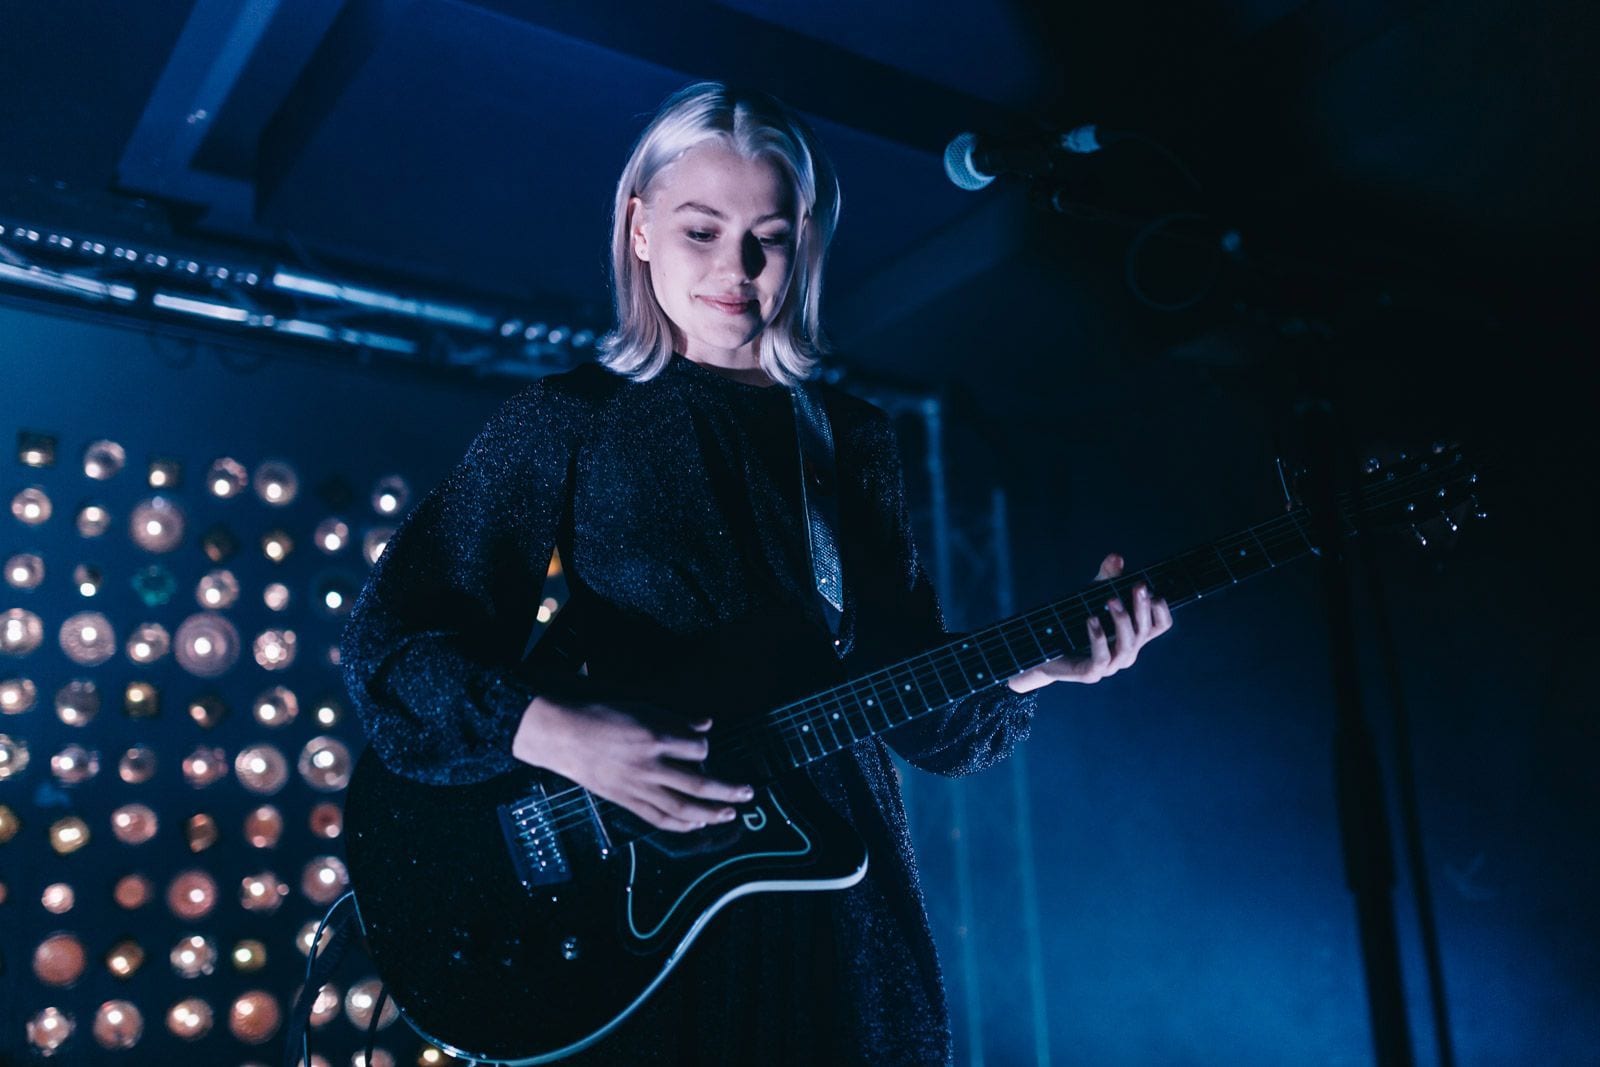 Who Is Phoebe Bridgers- The Rising Singer